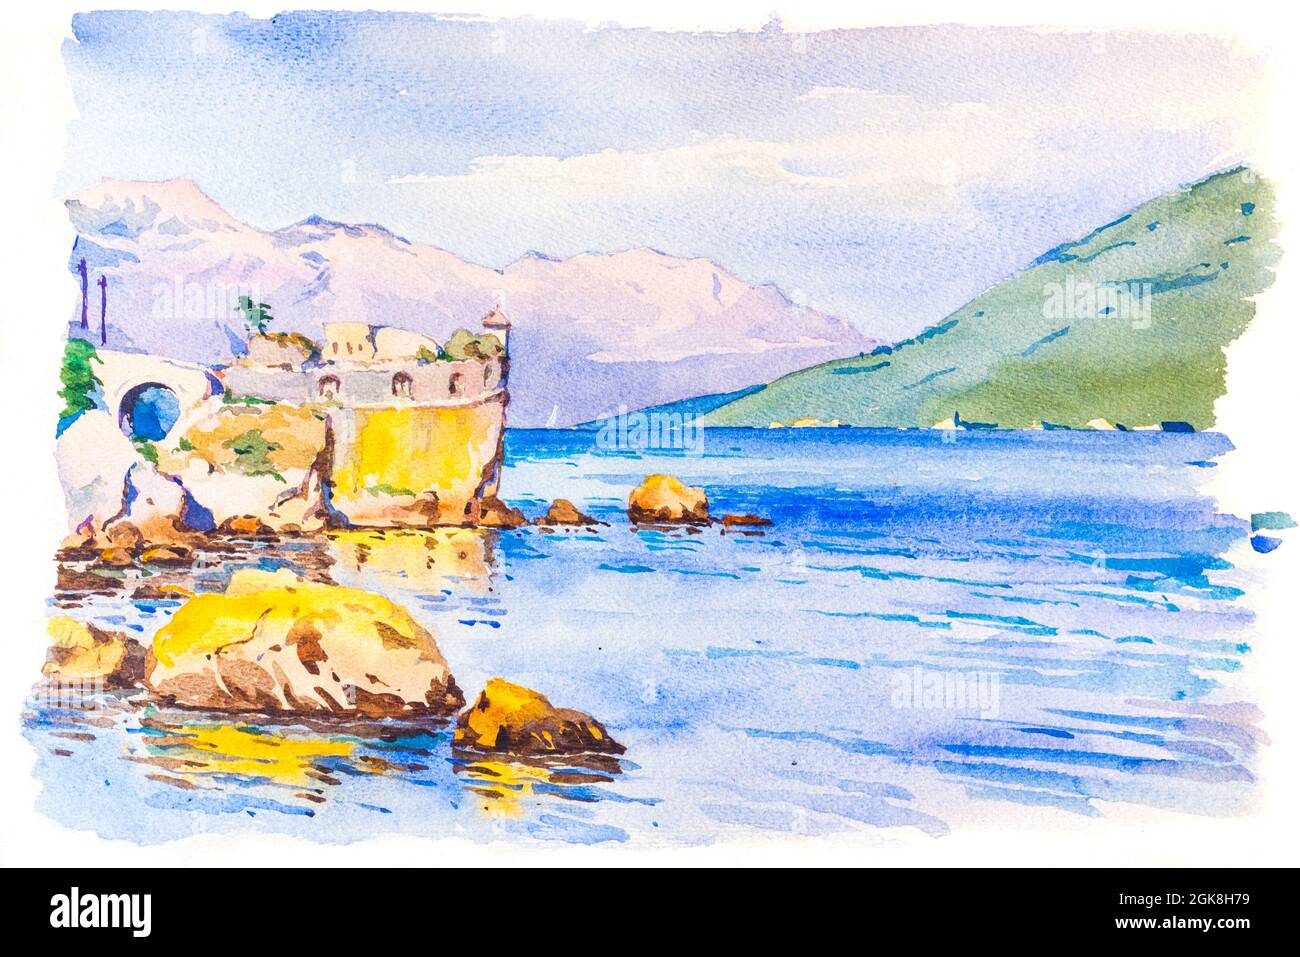 Ruins on coast of Adriatic Sea, Montenegro, near Mount Lovcen, Dalmatia, painted by Gyorgy Hars, 1938 Stock Photo